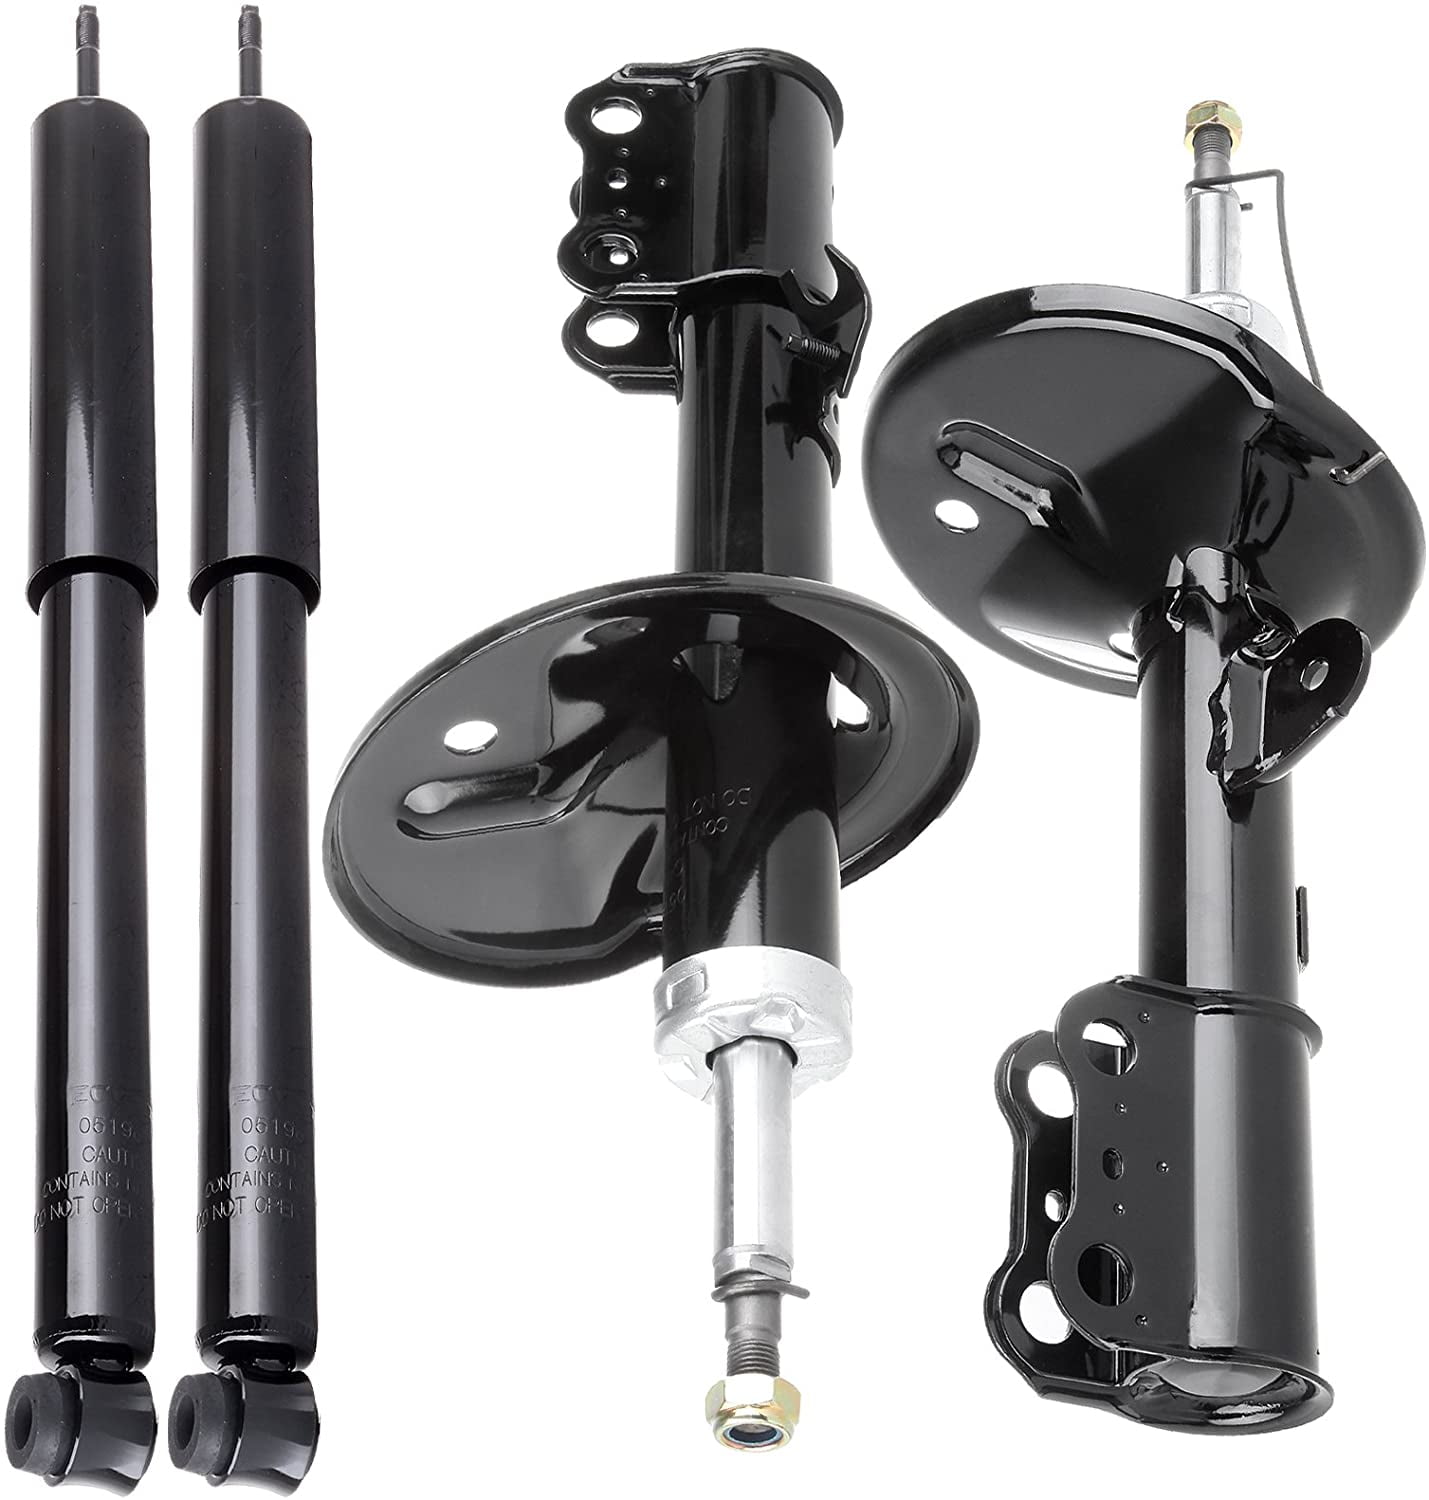 Shocks and Struts,ECCPP Front Pair Shock Absorbers Strut Kits Compatible with 1998 1999 2000 2001 2002 2003 Toyota Sienna 235624 235625 71437 71438 991824-5211-1817471 